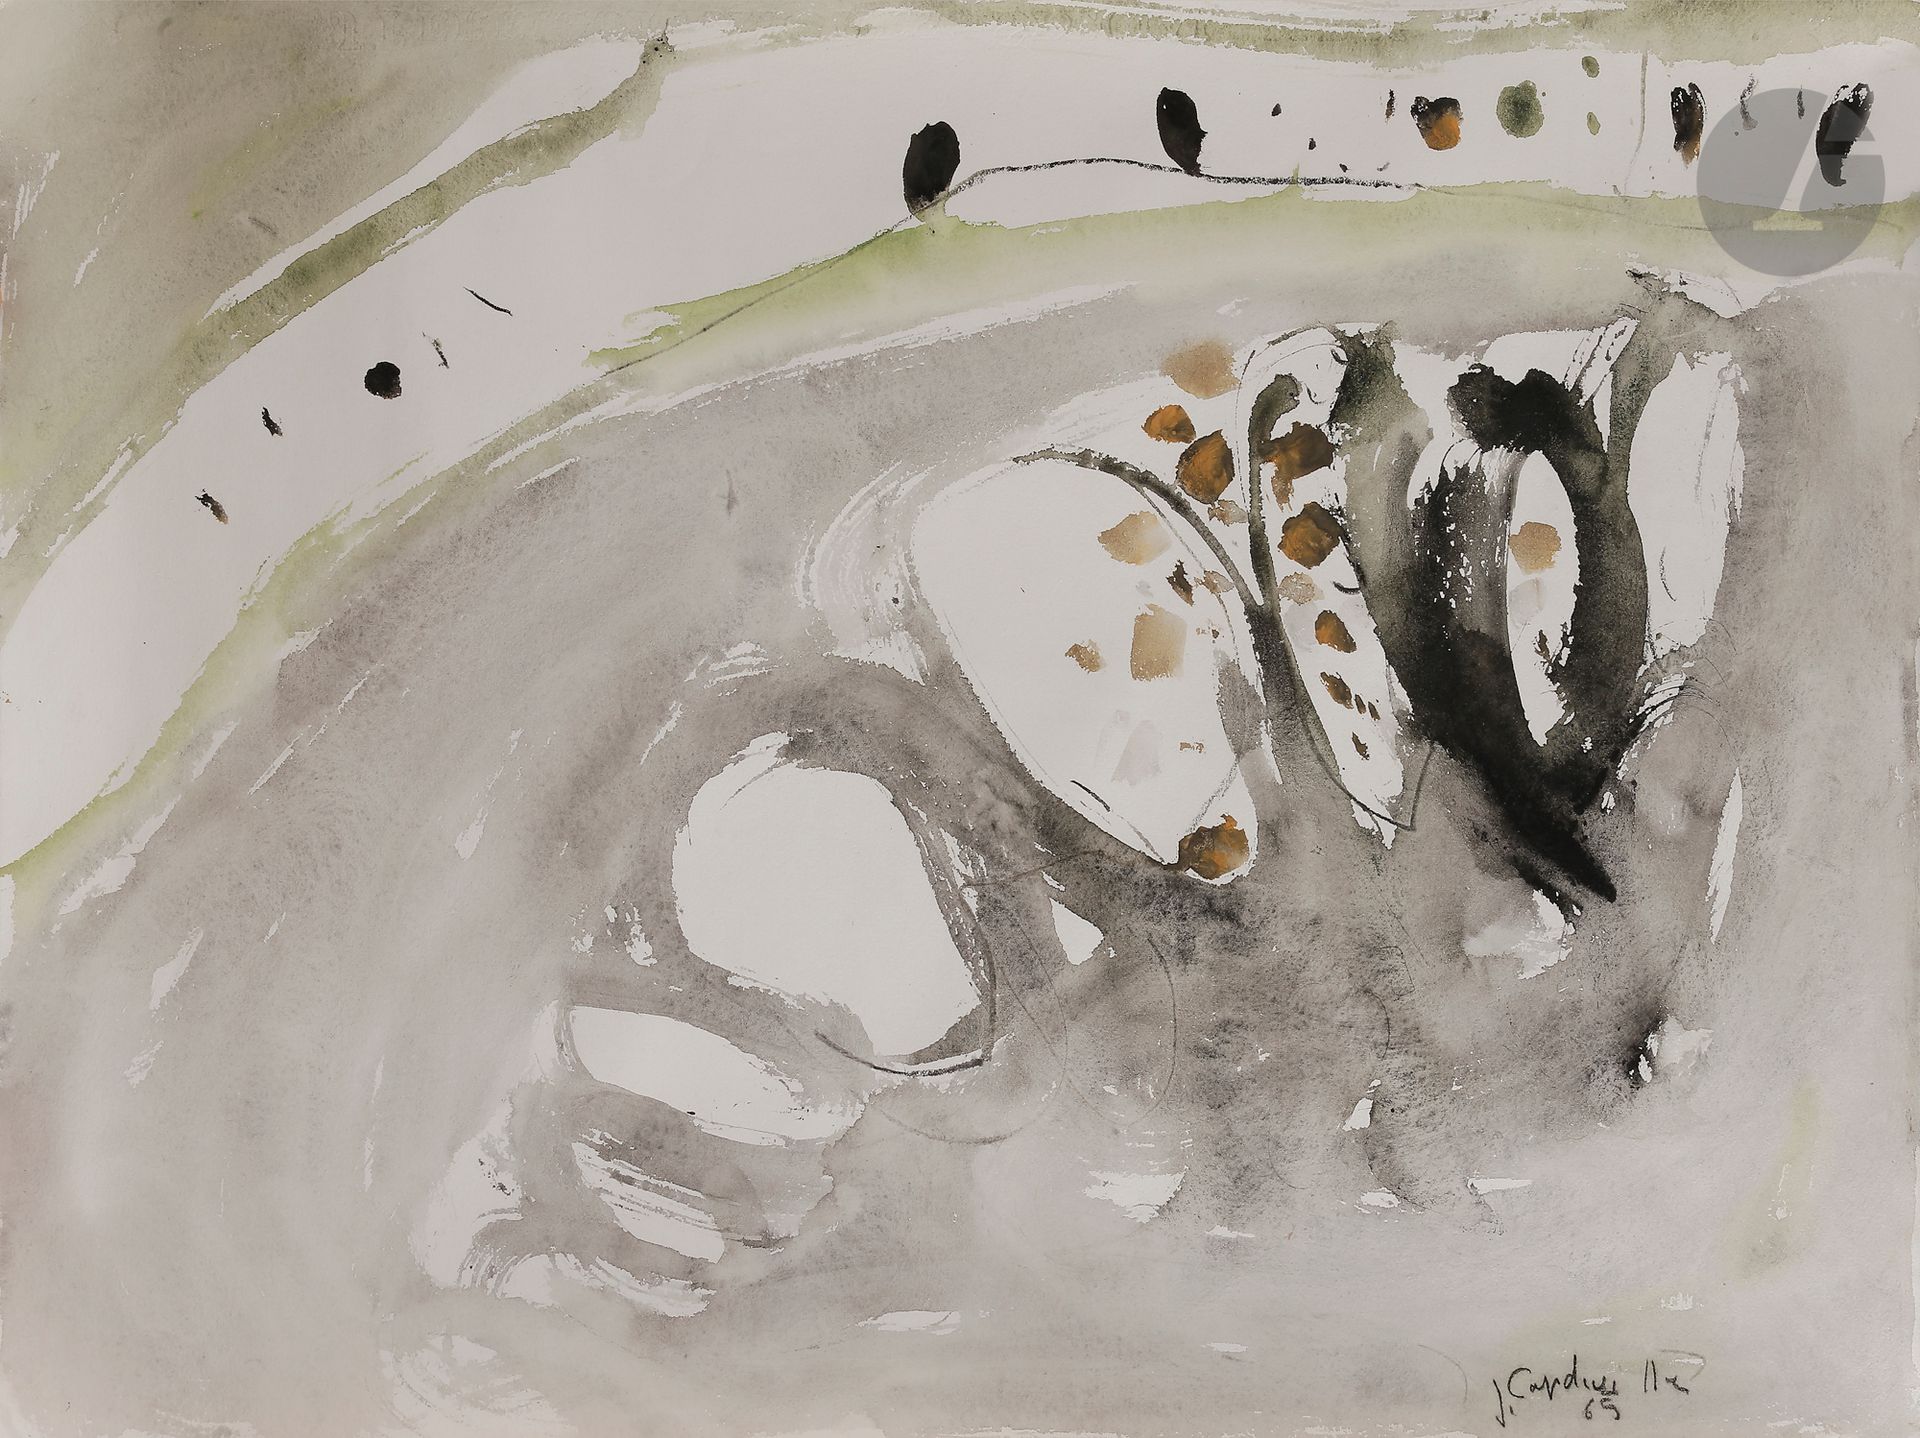 Null 
Jean CAPDEVILLE (1917-2011



)Komposition, 1965Aquarell



.



Signiert &hellip;